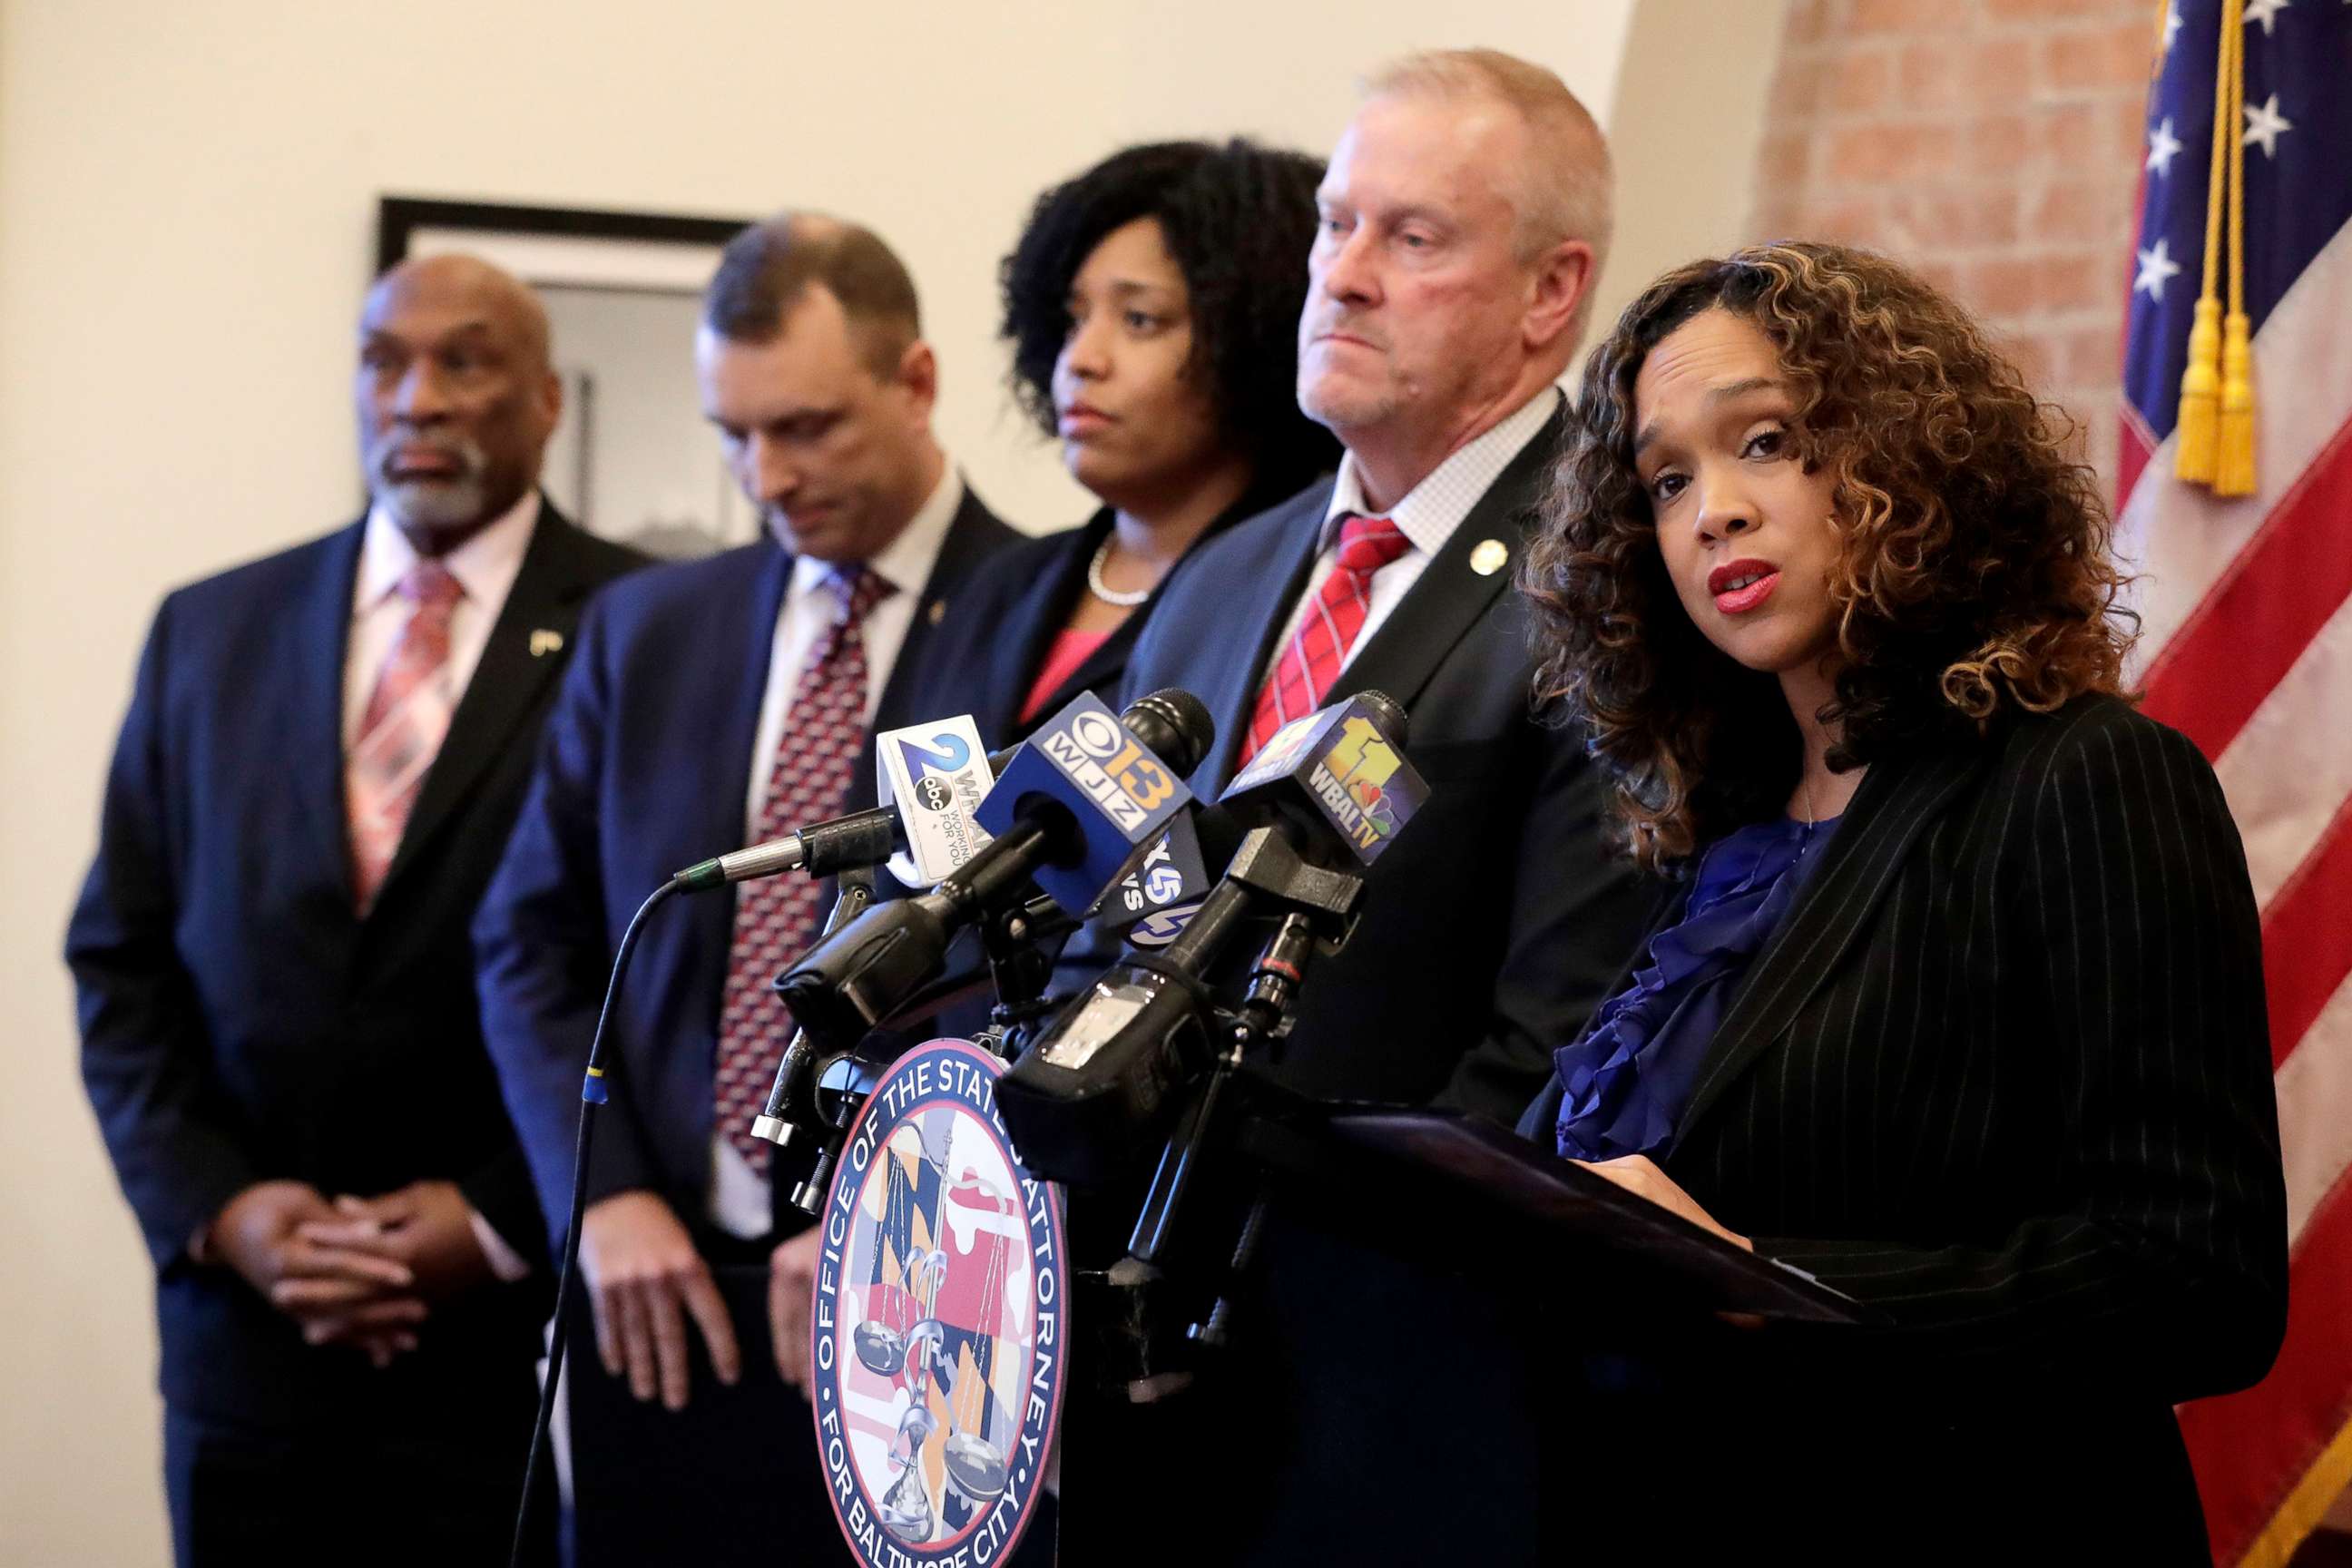 PHOTO: Maryland State Attorney Marilyn Mosby, right, speaks during a news conference announcing the indictment of correctional officers, Dec. 3, 2019, in Baltimore.